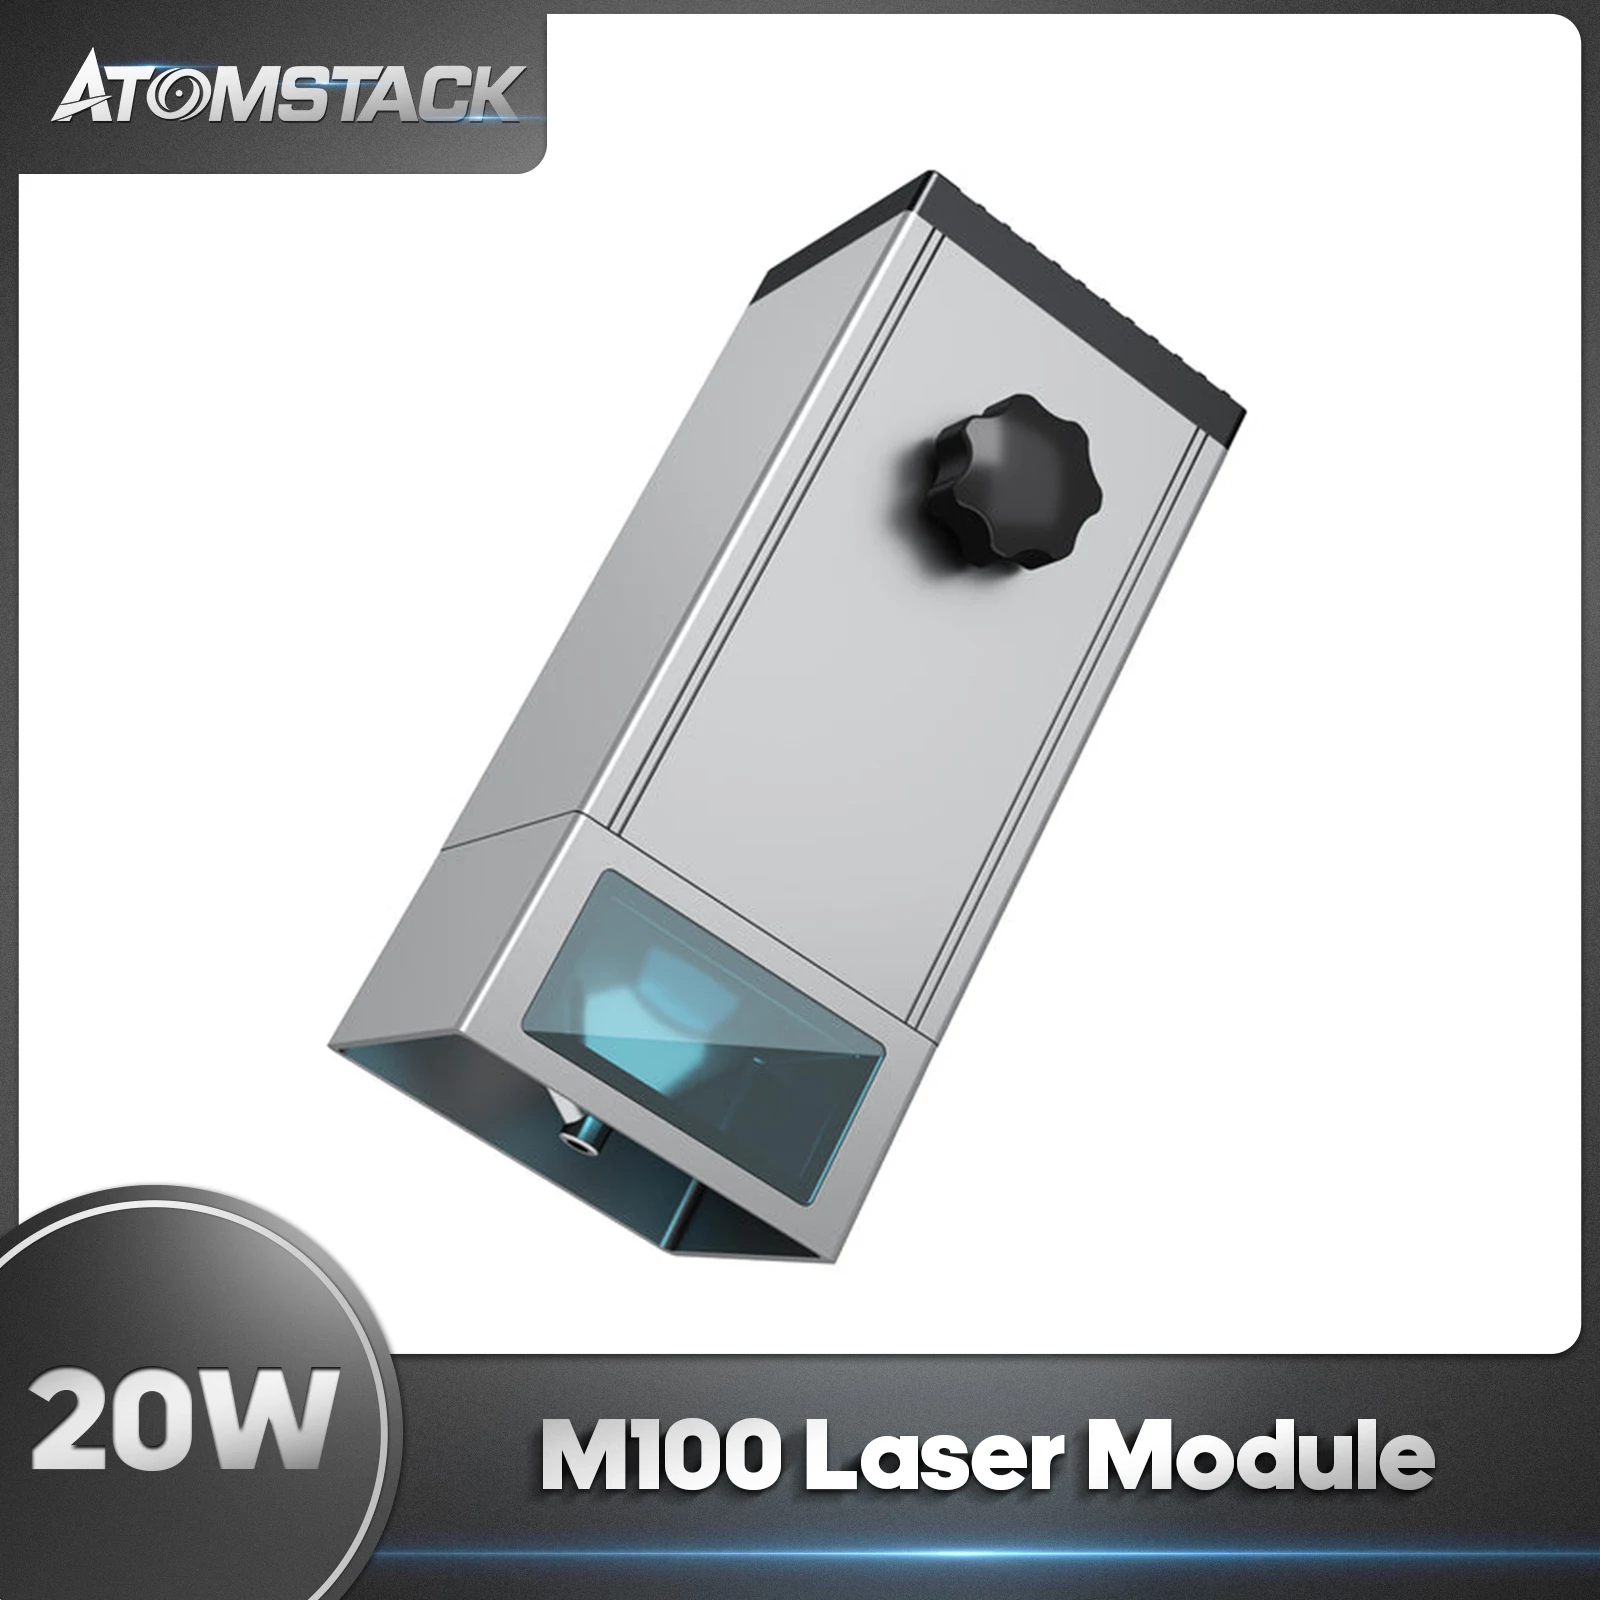 Atomstack M100 Laser Module 20W Output Power With Air Assist System CNC laser engraving for wood Acrylic glass metal cutter tool